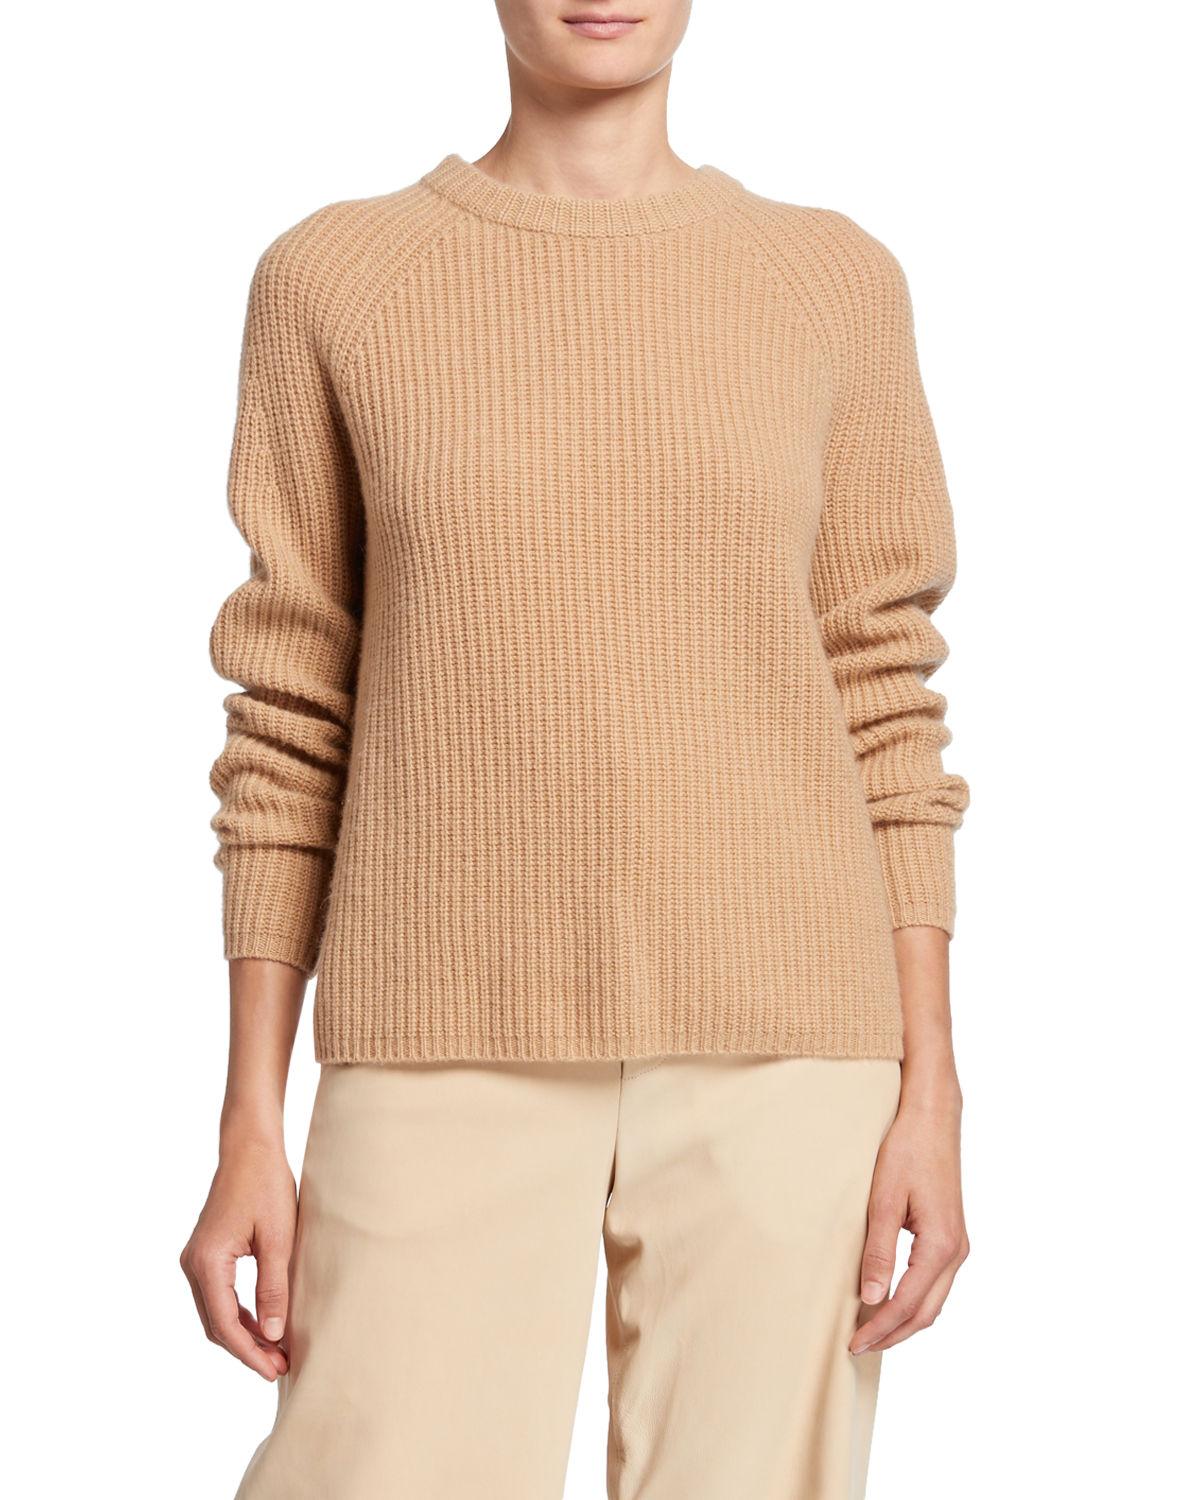 Vince Shaker Rib Cashmere Sweater in Brown - Lyst